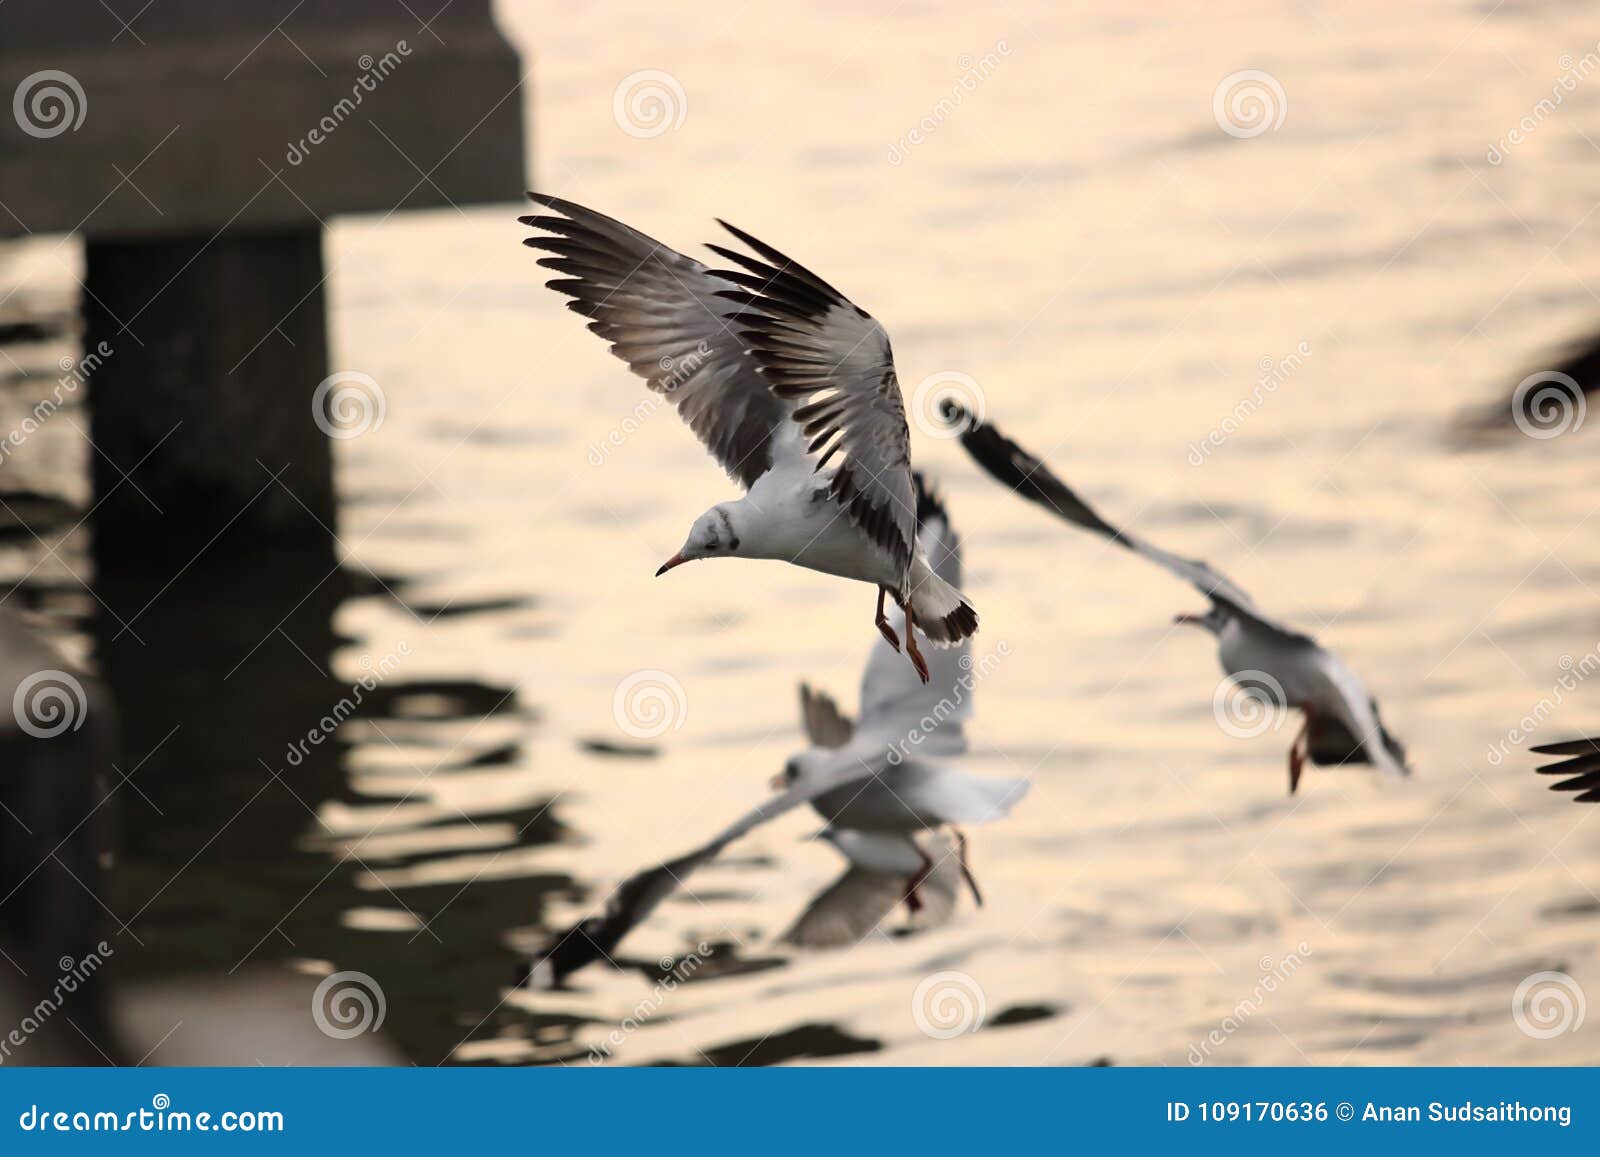 flock of seagulls flying in the sky over sea during sunset science name is charadriiformes laridae . selective focus and shallo